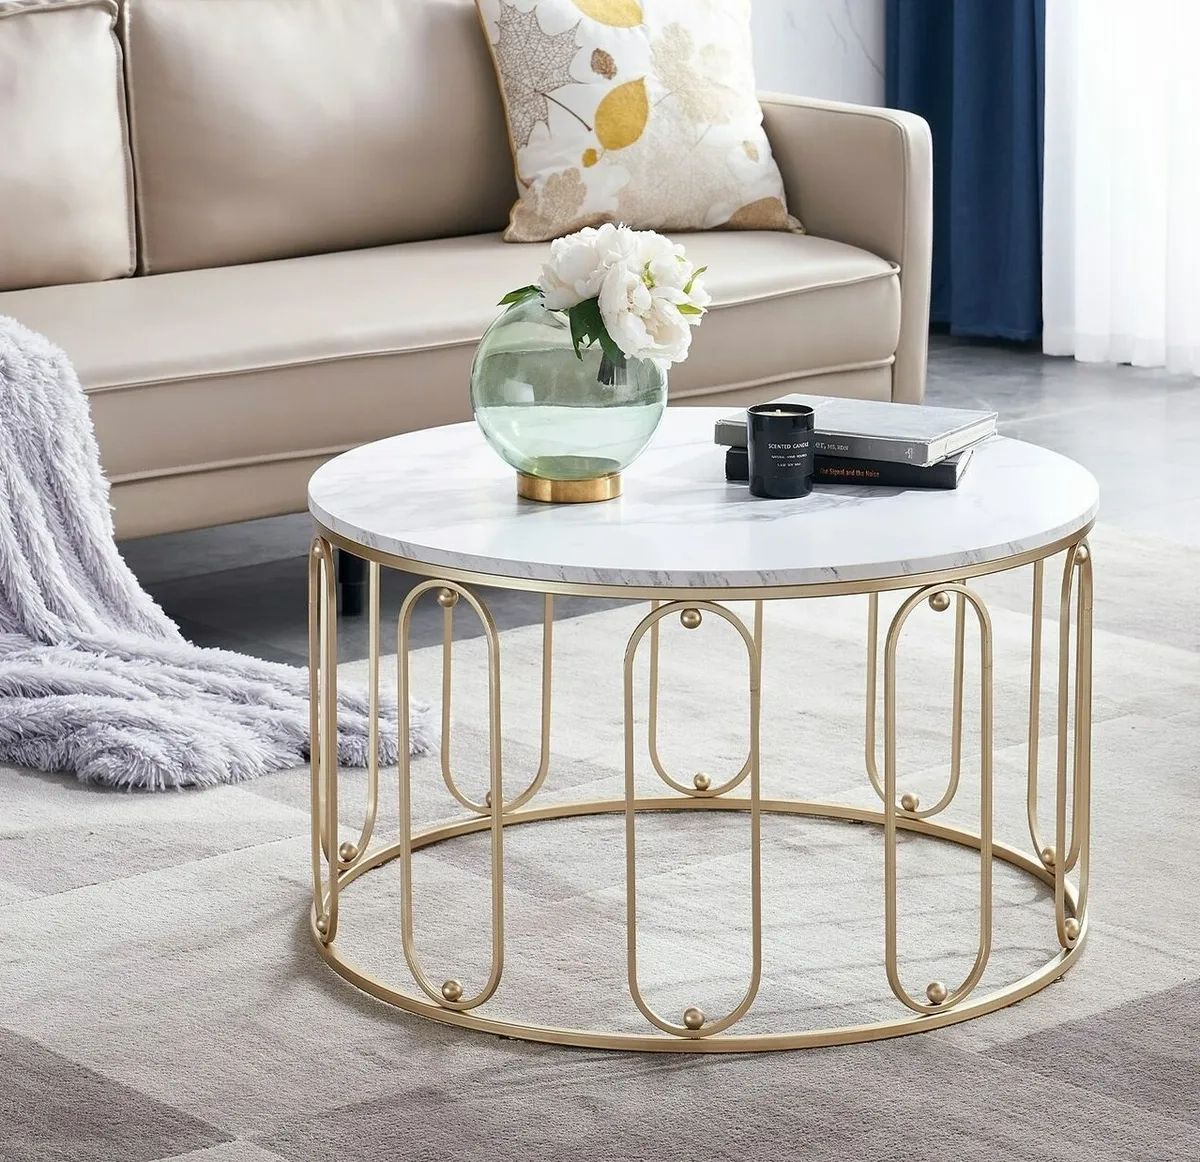 Ivinta Modern Nesting Coffee Table, Home Round Cocktail Table With Metal  Frame | Ebay With Regard To Modern Nesting Coffee Tables (View 3 of 15)